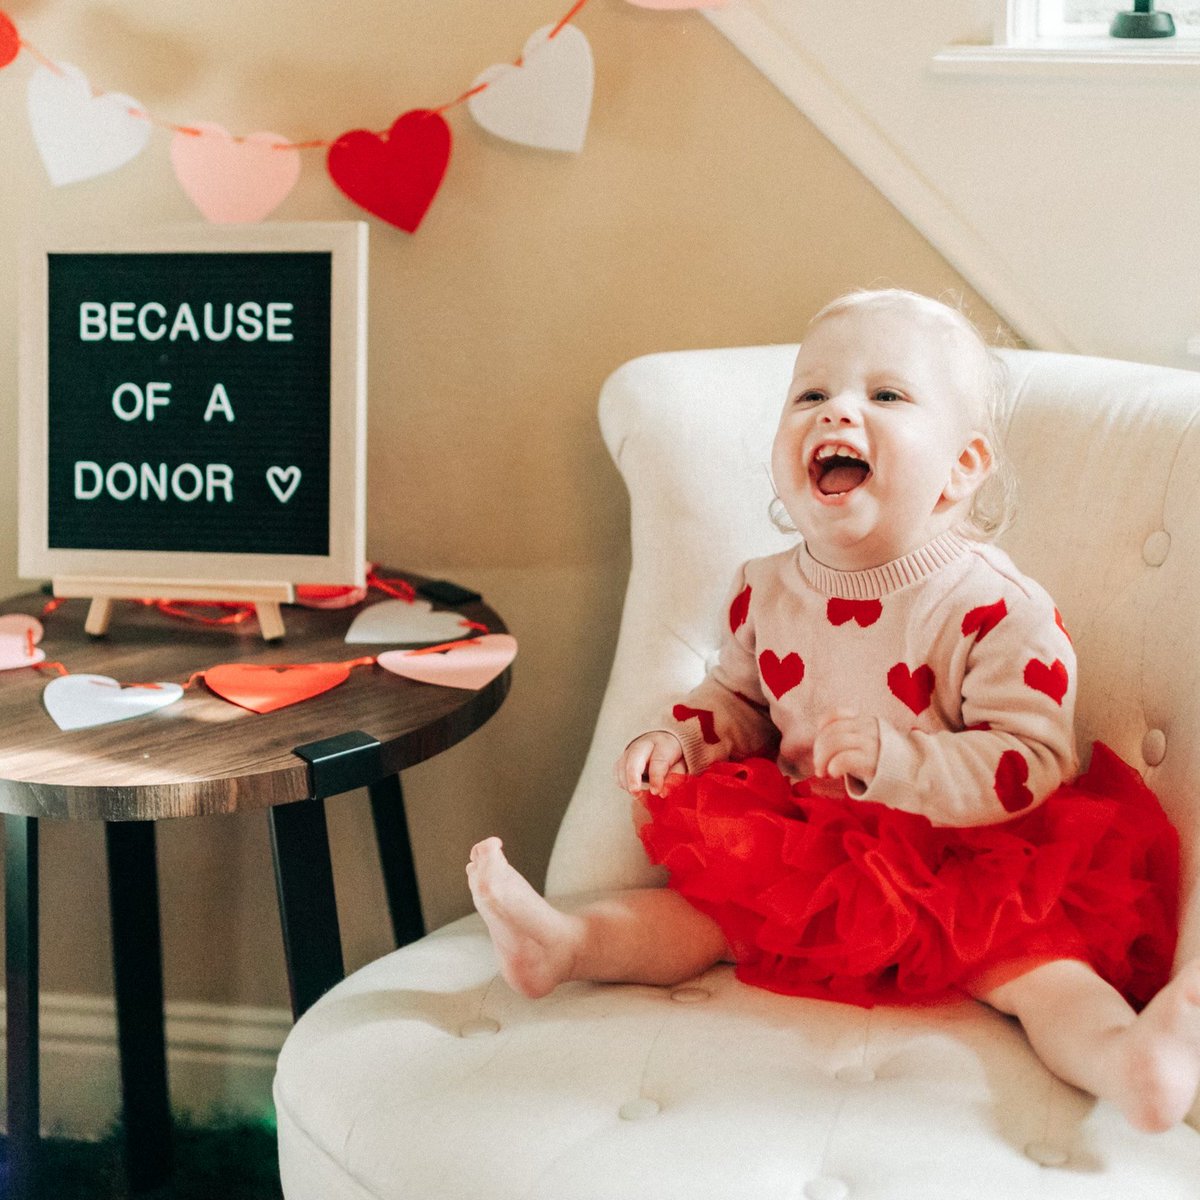 At 1 week old, Lilah had a Norwood procedure for her Hypoplastic Left Heart Syndrome (HLHS). As complications continued, our multidisciplinary teams performed a heart transplant. Lilah is 21 months old and can crawl, talk, and play! Learn more about HLHS: bit.ly/3tJ2niA